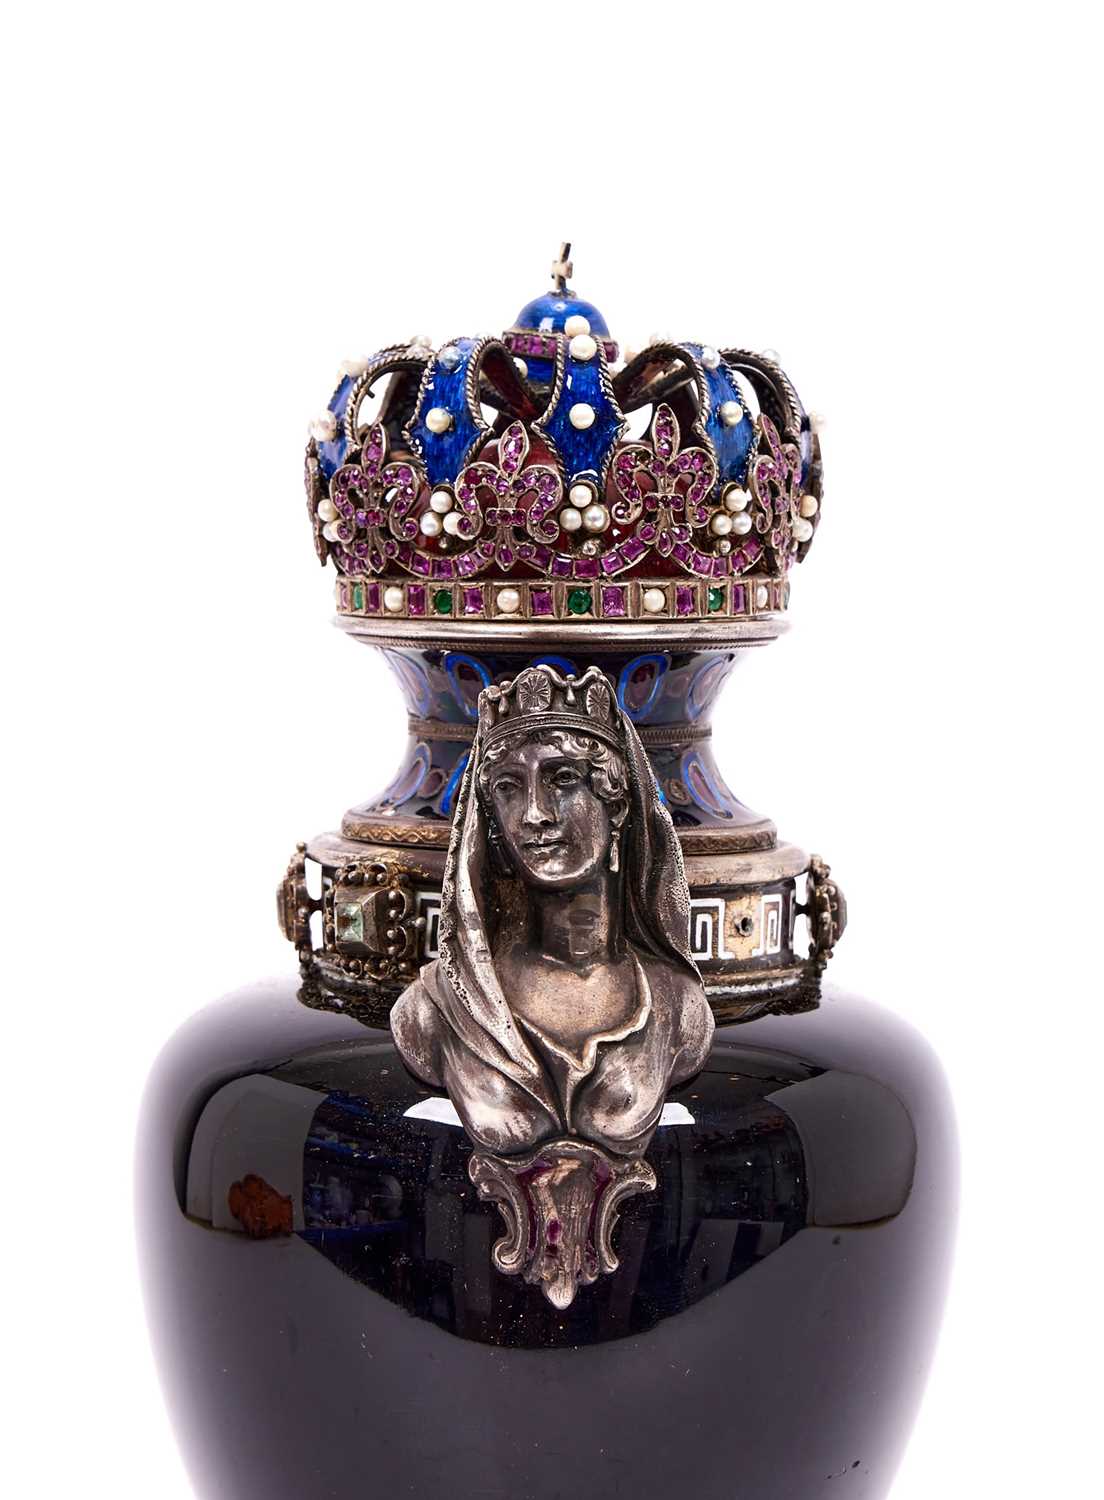 A FINE 19TH CENTURY VIENNESE ENAMEL, SILVER AND JEWELLED URN AND COVER OF ROYAL THEME - Image 4 of 6